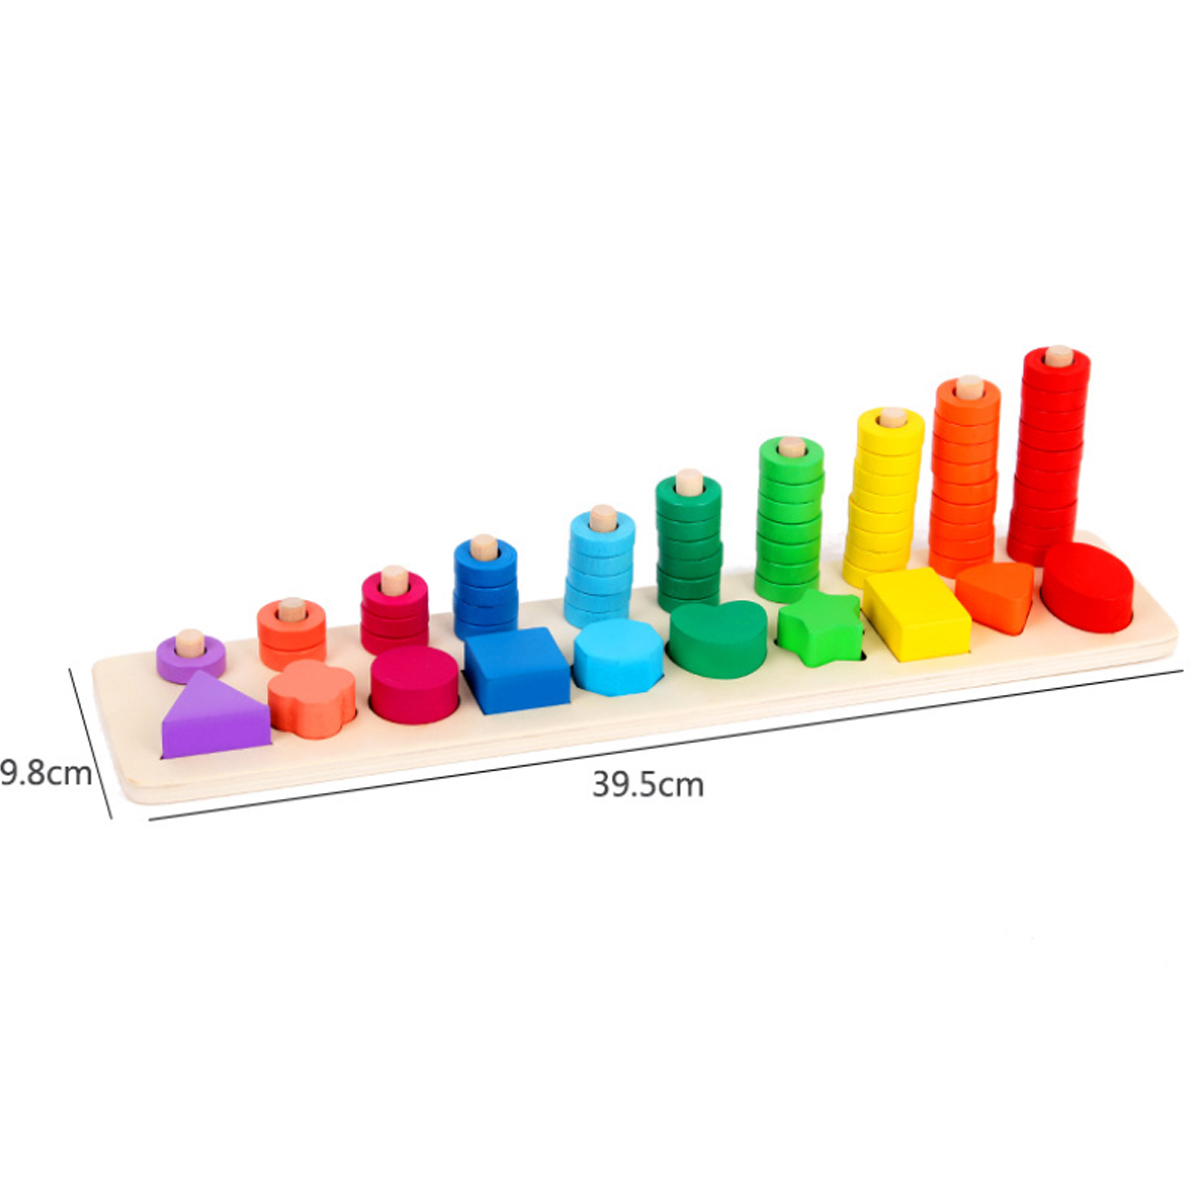 Wooden-Math-Toy-Board-Montessori-Counting-Board-Preschool-Learning-Toys-for-Children-Gifts-1629382-8